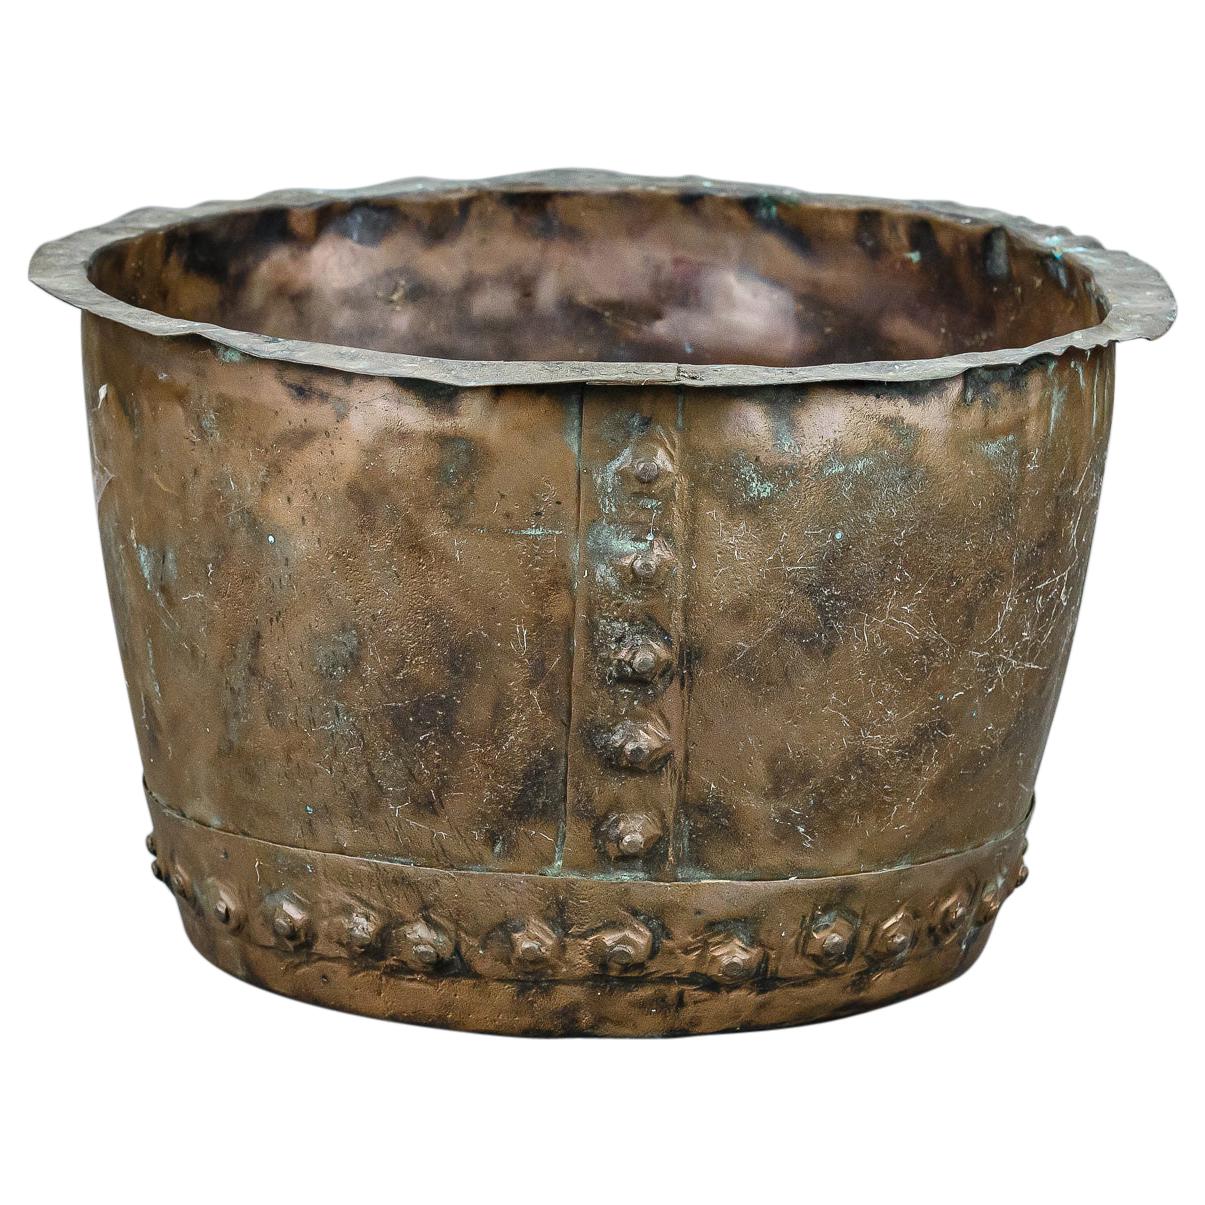 English 19th Century Rivetted Copper